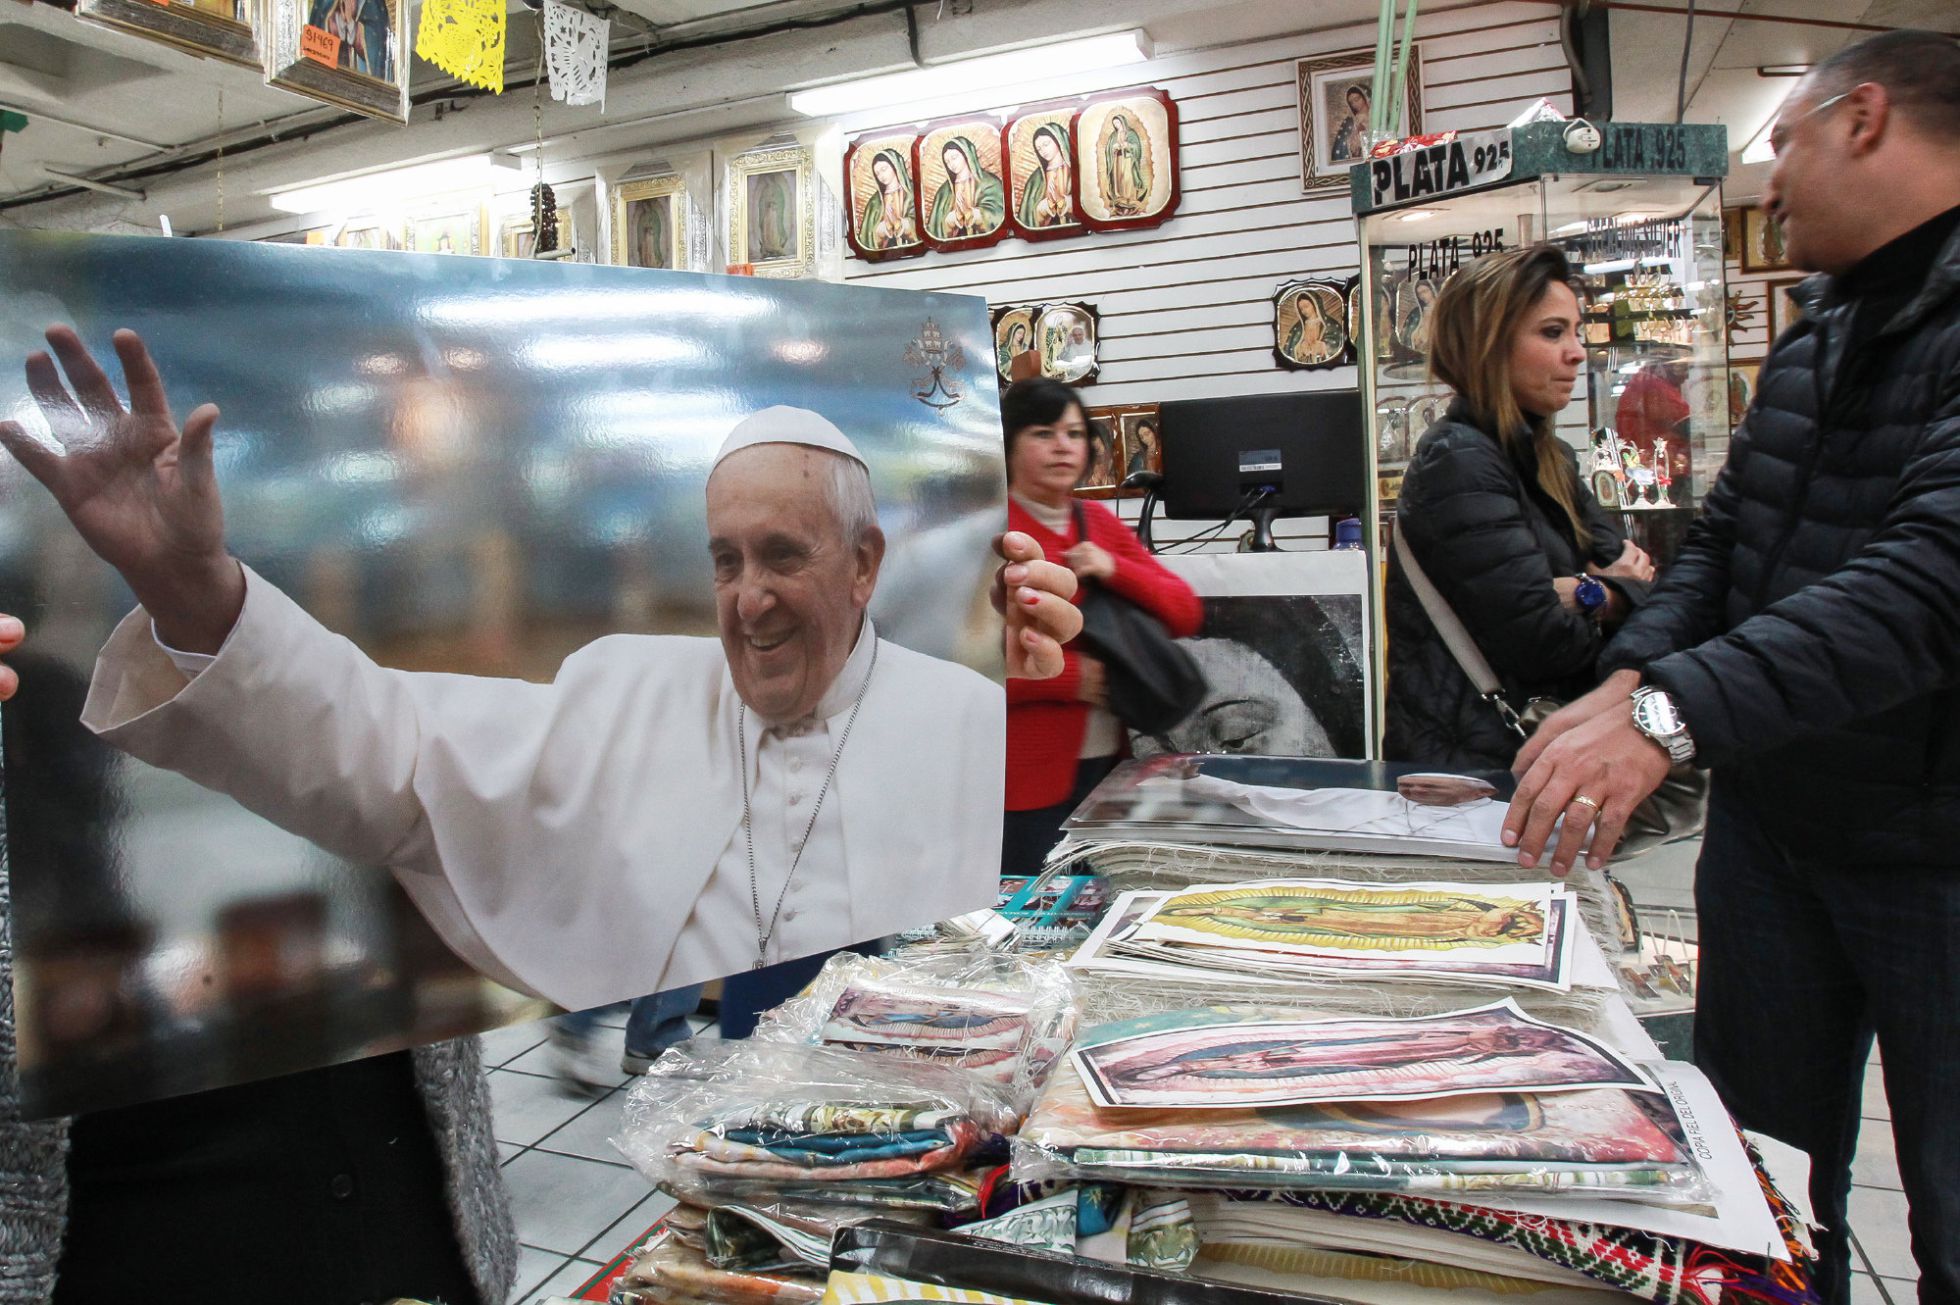 Pope Francis items sold at Basilica de Guadalupe (Photo: Google)